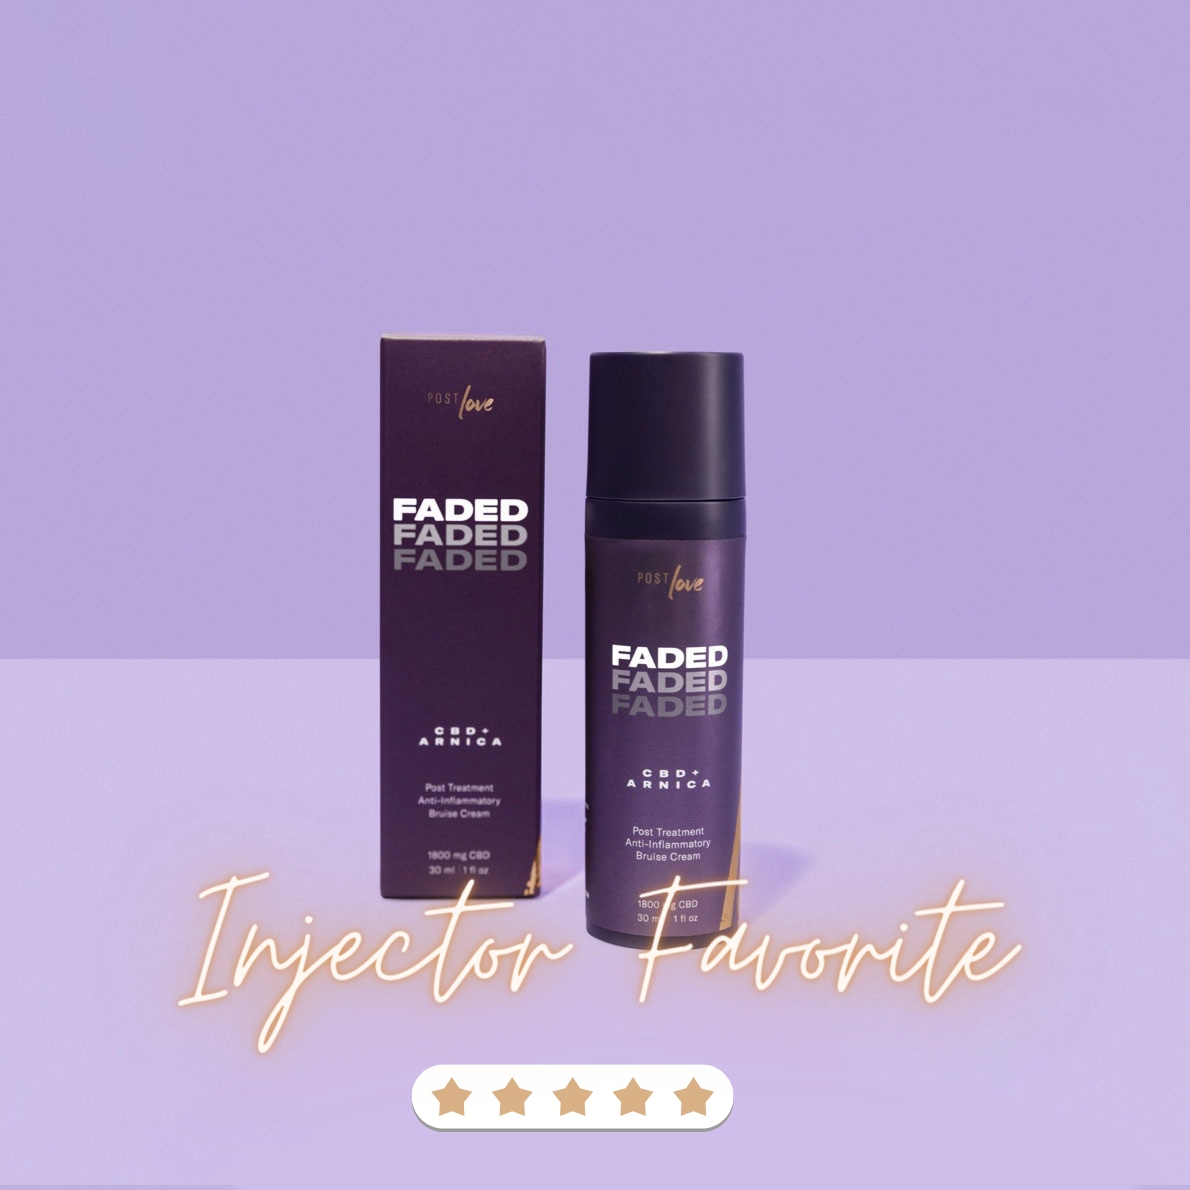 Faded 30 ml Injector Favorite